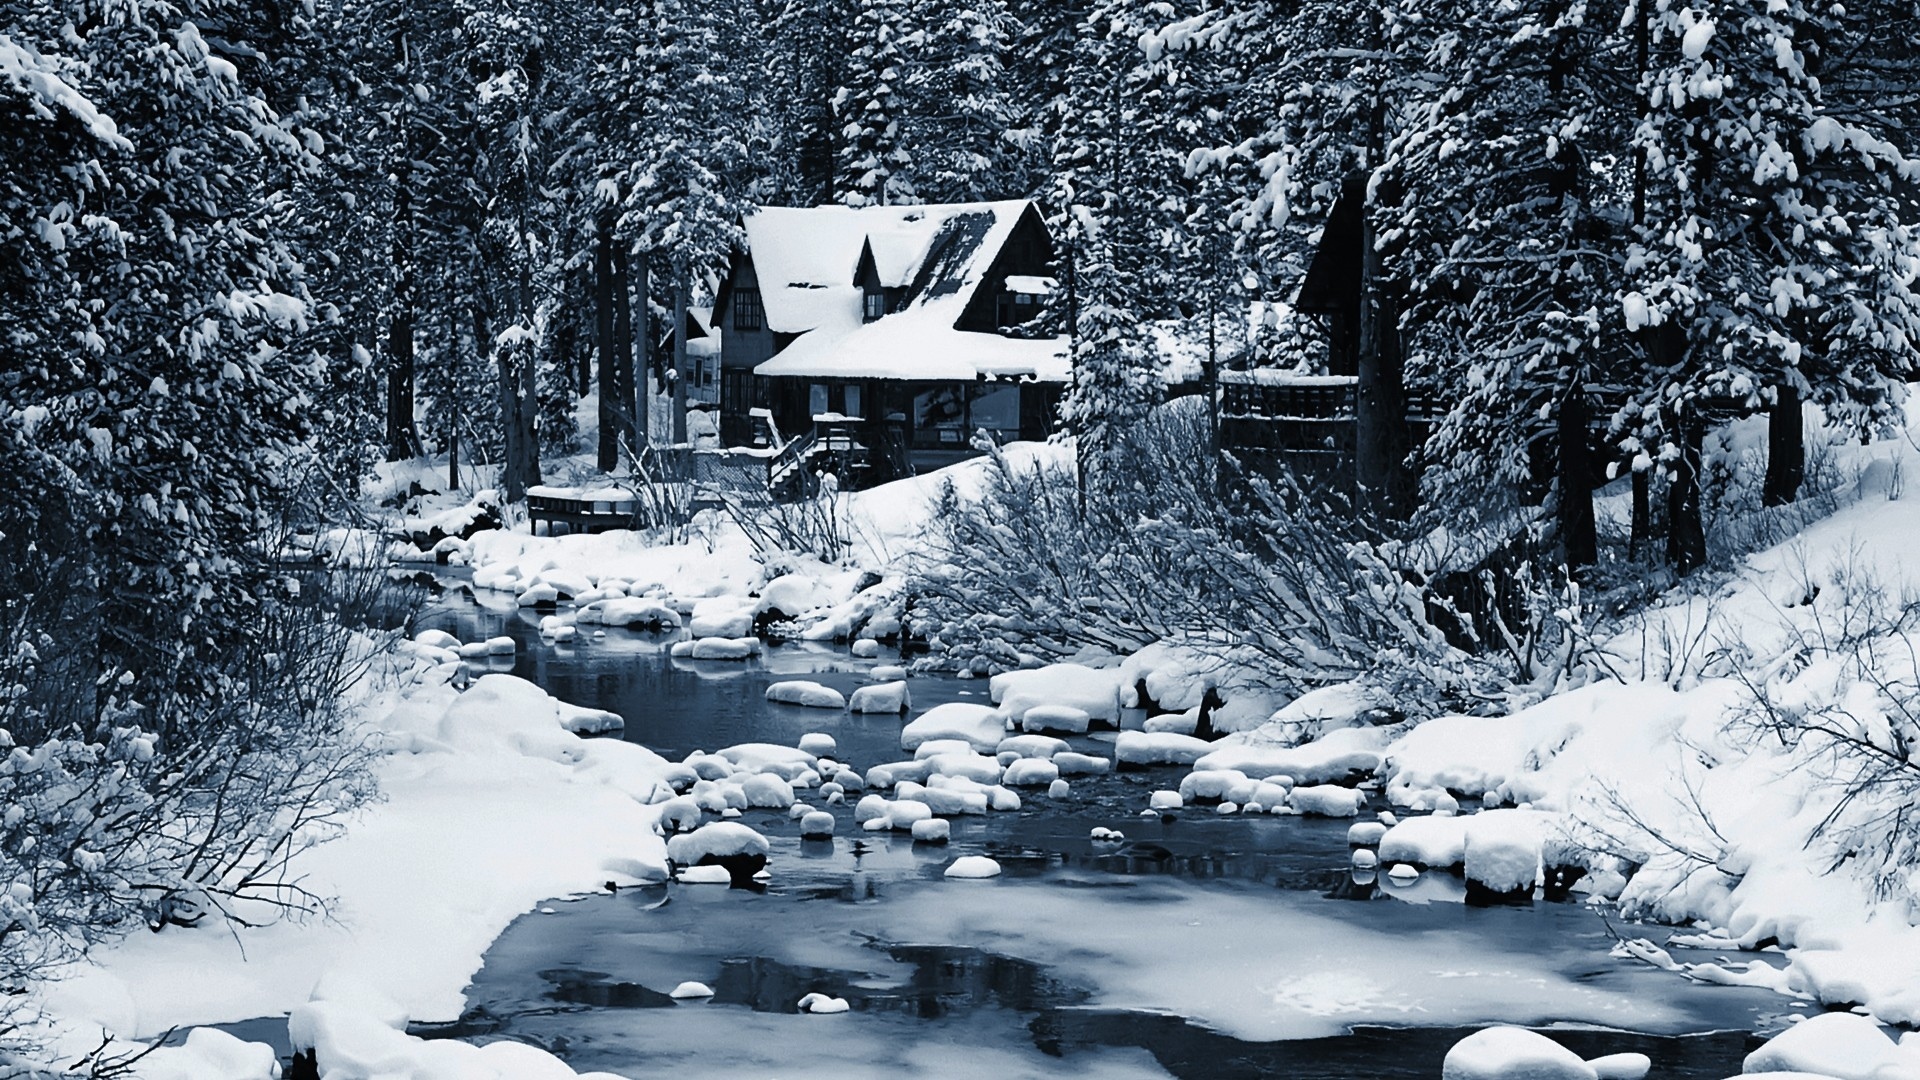 nature, Landscapes, Winter, Snow, Seasons, Rivers, Stream, Rocks, Trees, Forest, Architecture, Buildings, House, White, Contrast Wallpaper